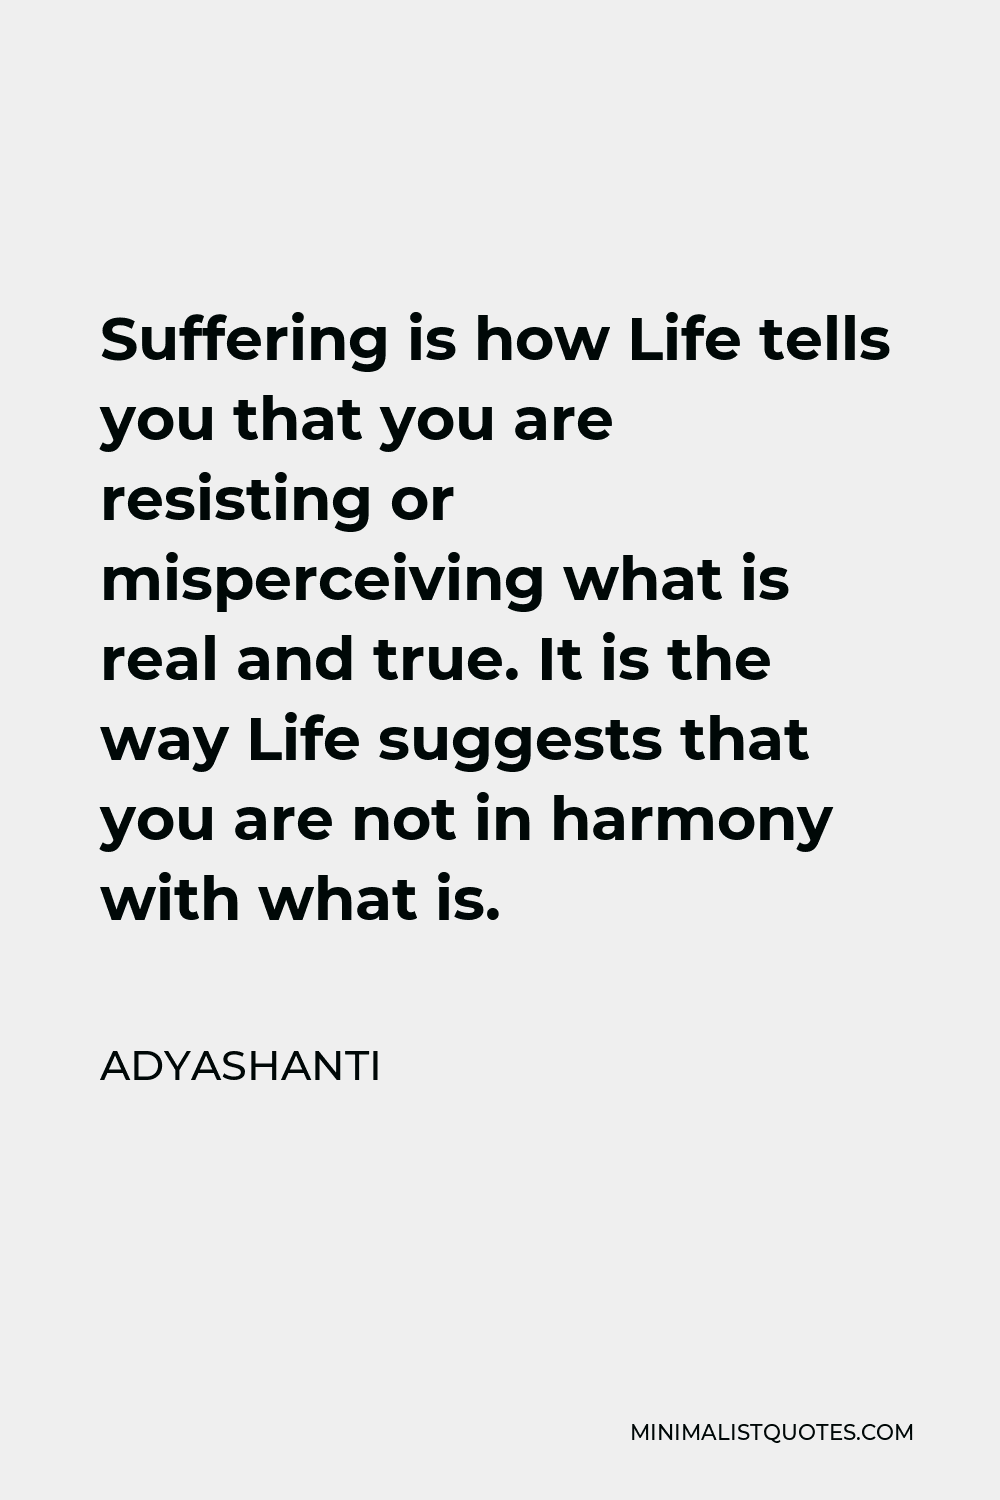 Adyashanti Quote - Suffering is how Life tells you that you are resisting or misperceiving what is real and true. It is the way Life suggests that you are not in harmony with what is.